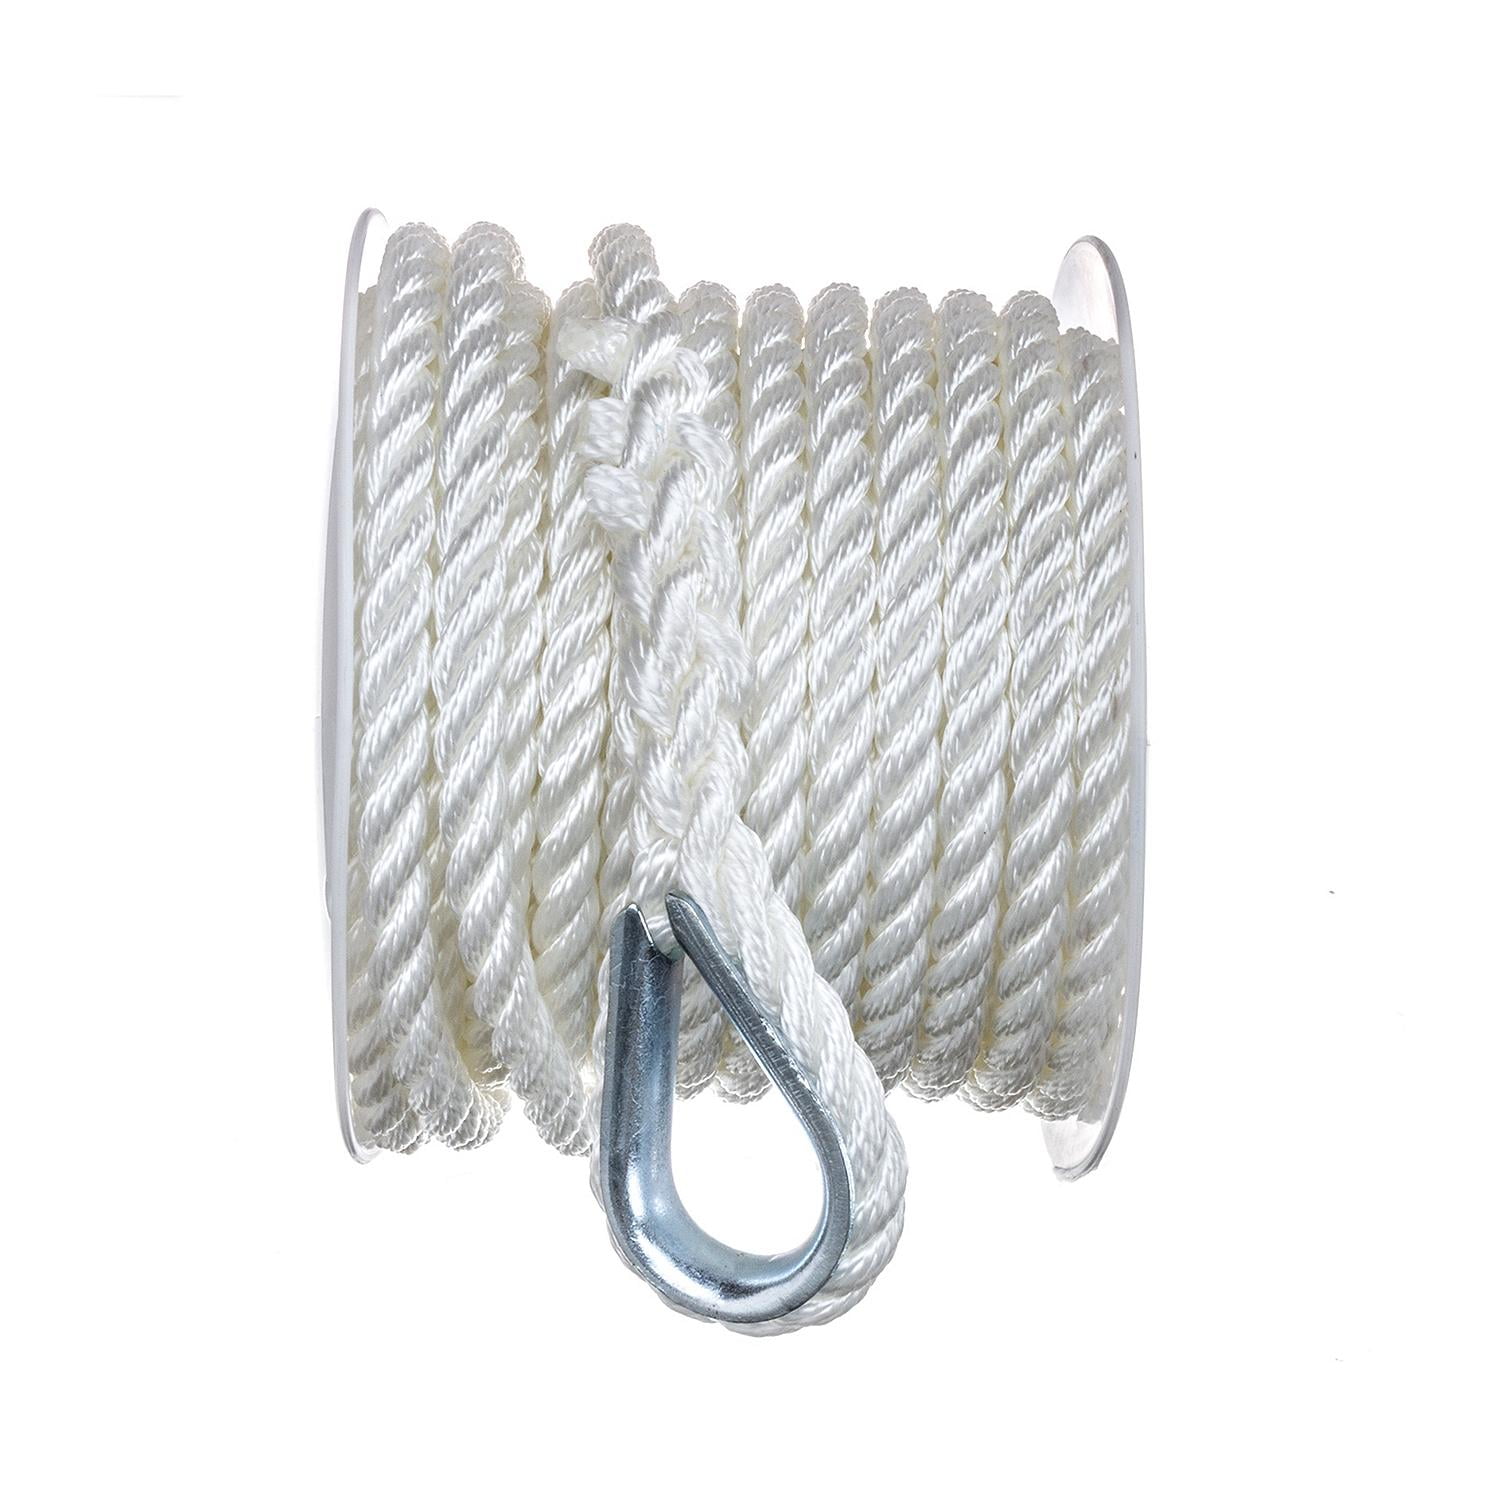 Seachoice Anchor Line Rope, 3-Strand Twisted, White, Nylon, 3/8 In. X 50 Ft.